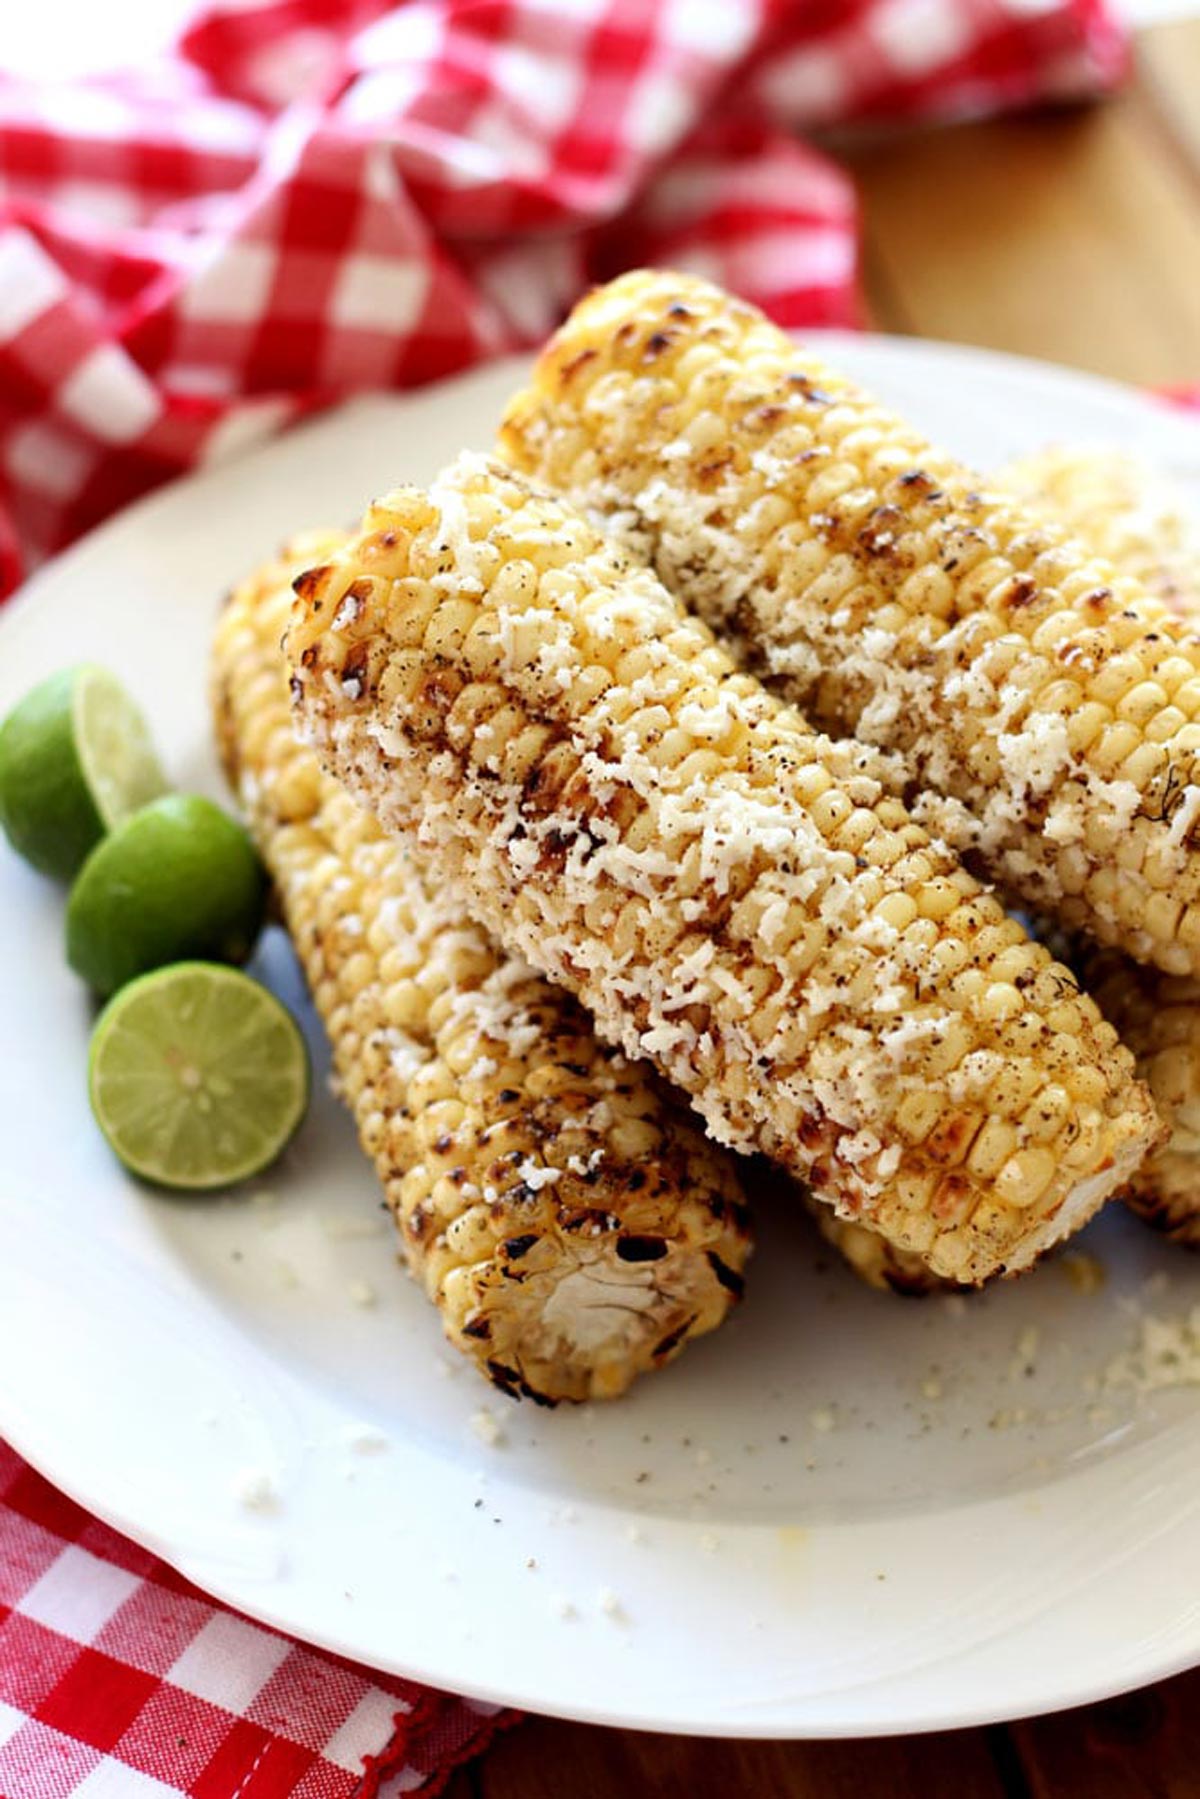 A plate of Corn on the cob and Cotija cheese on a white plate.